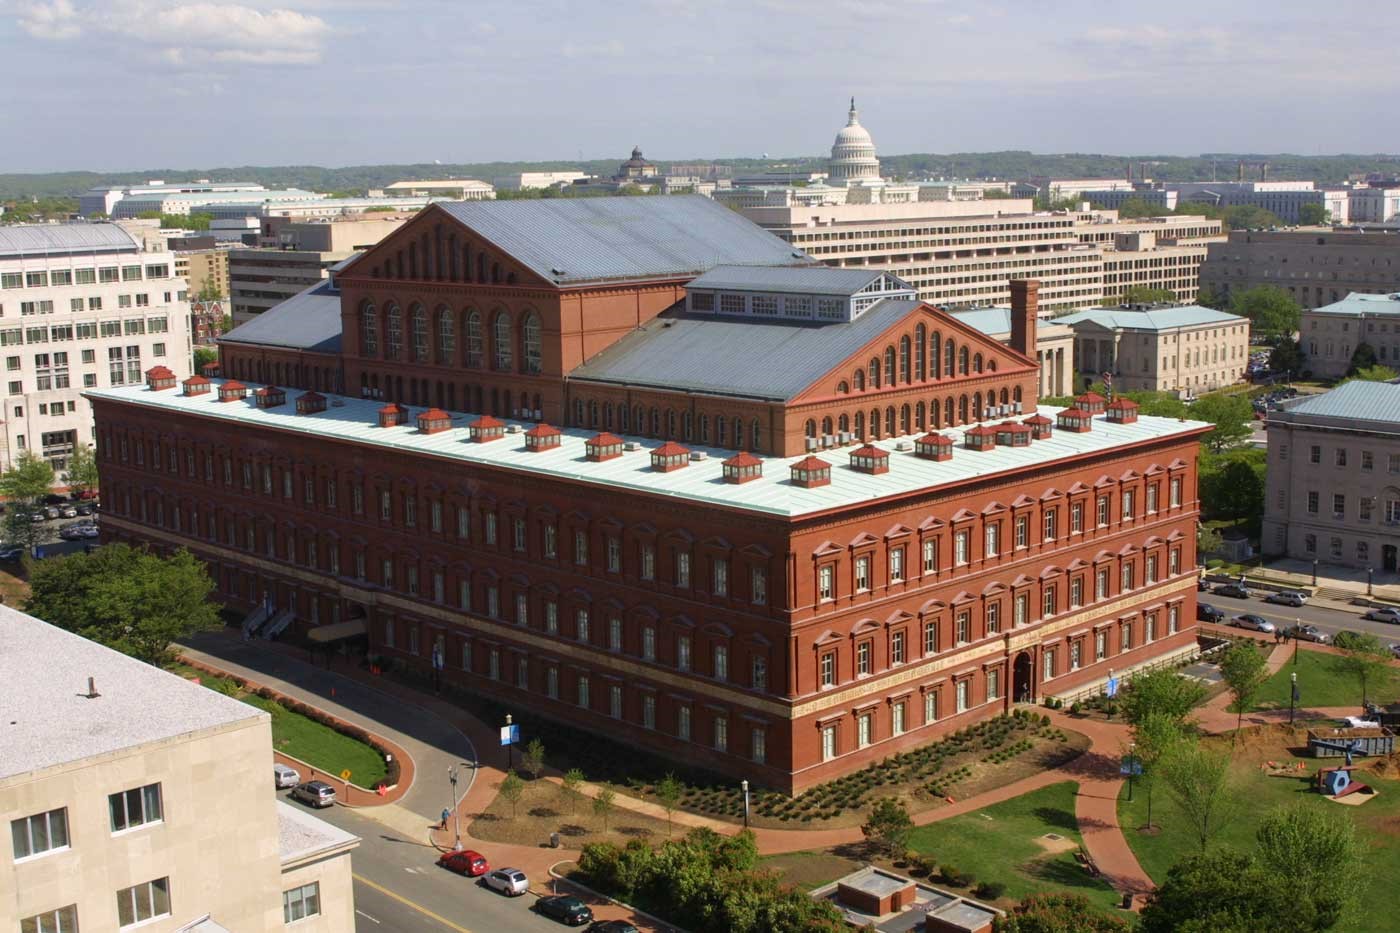 A photograph of a multi-level brick building, known as the National Building Museum in Washington, D.C.